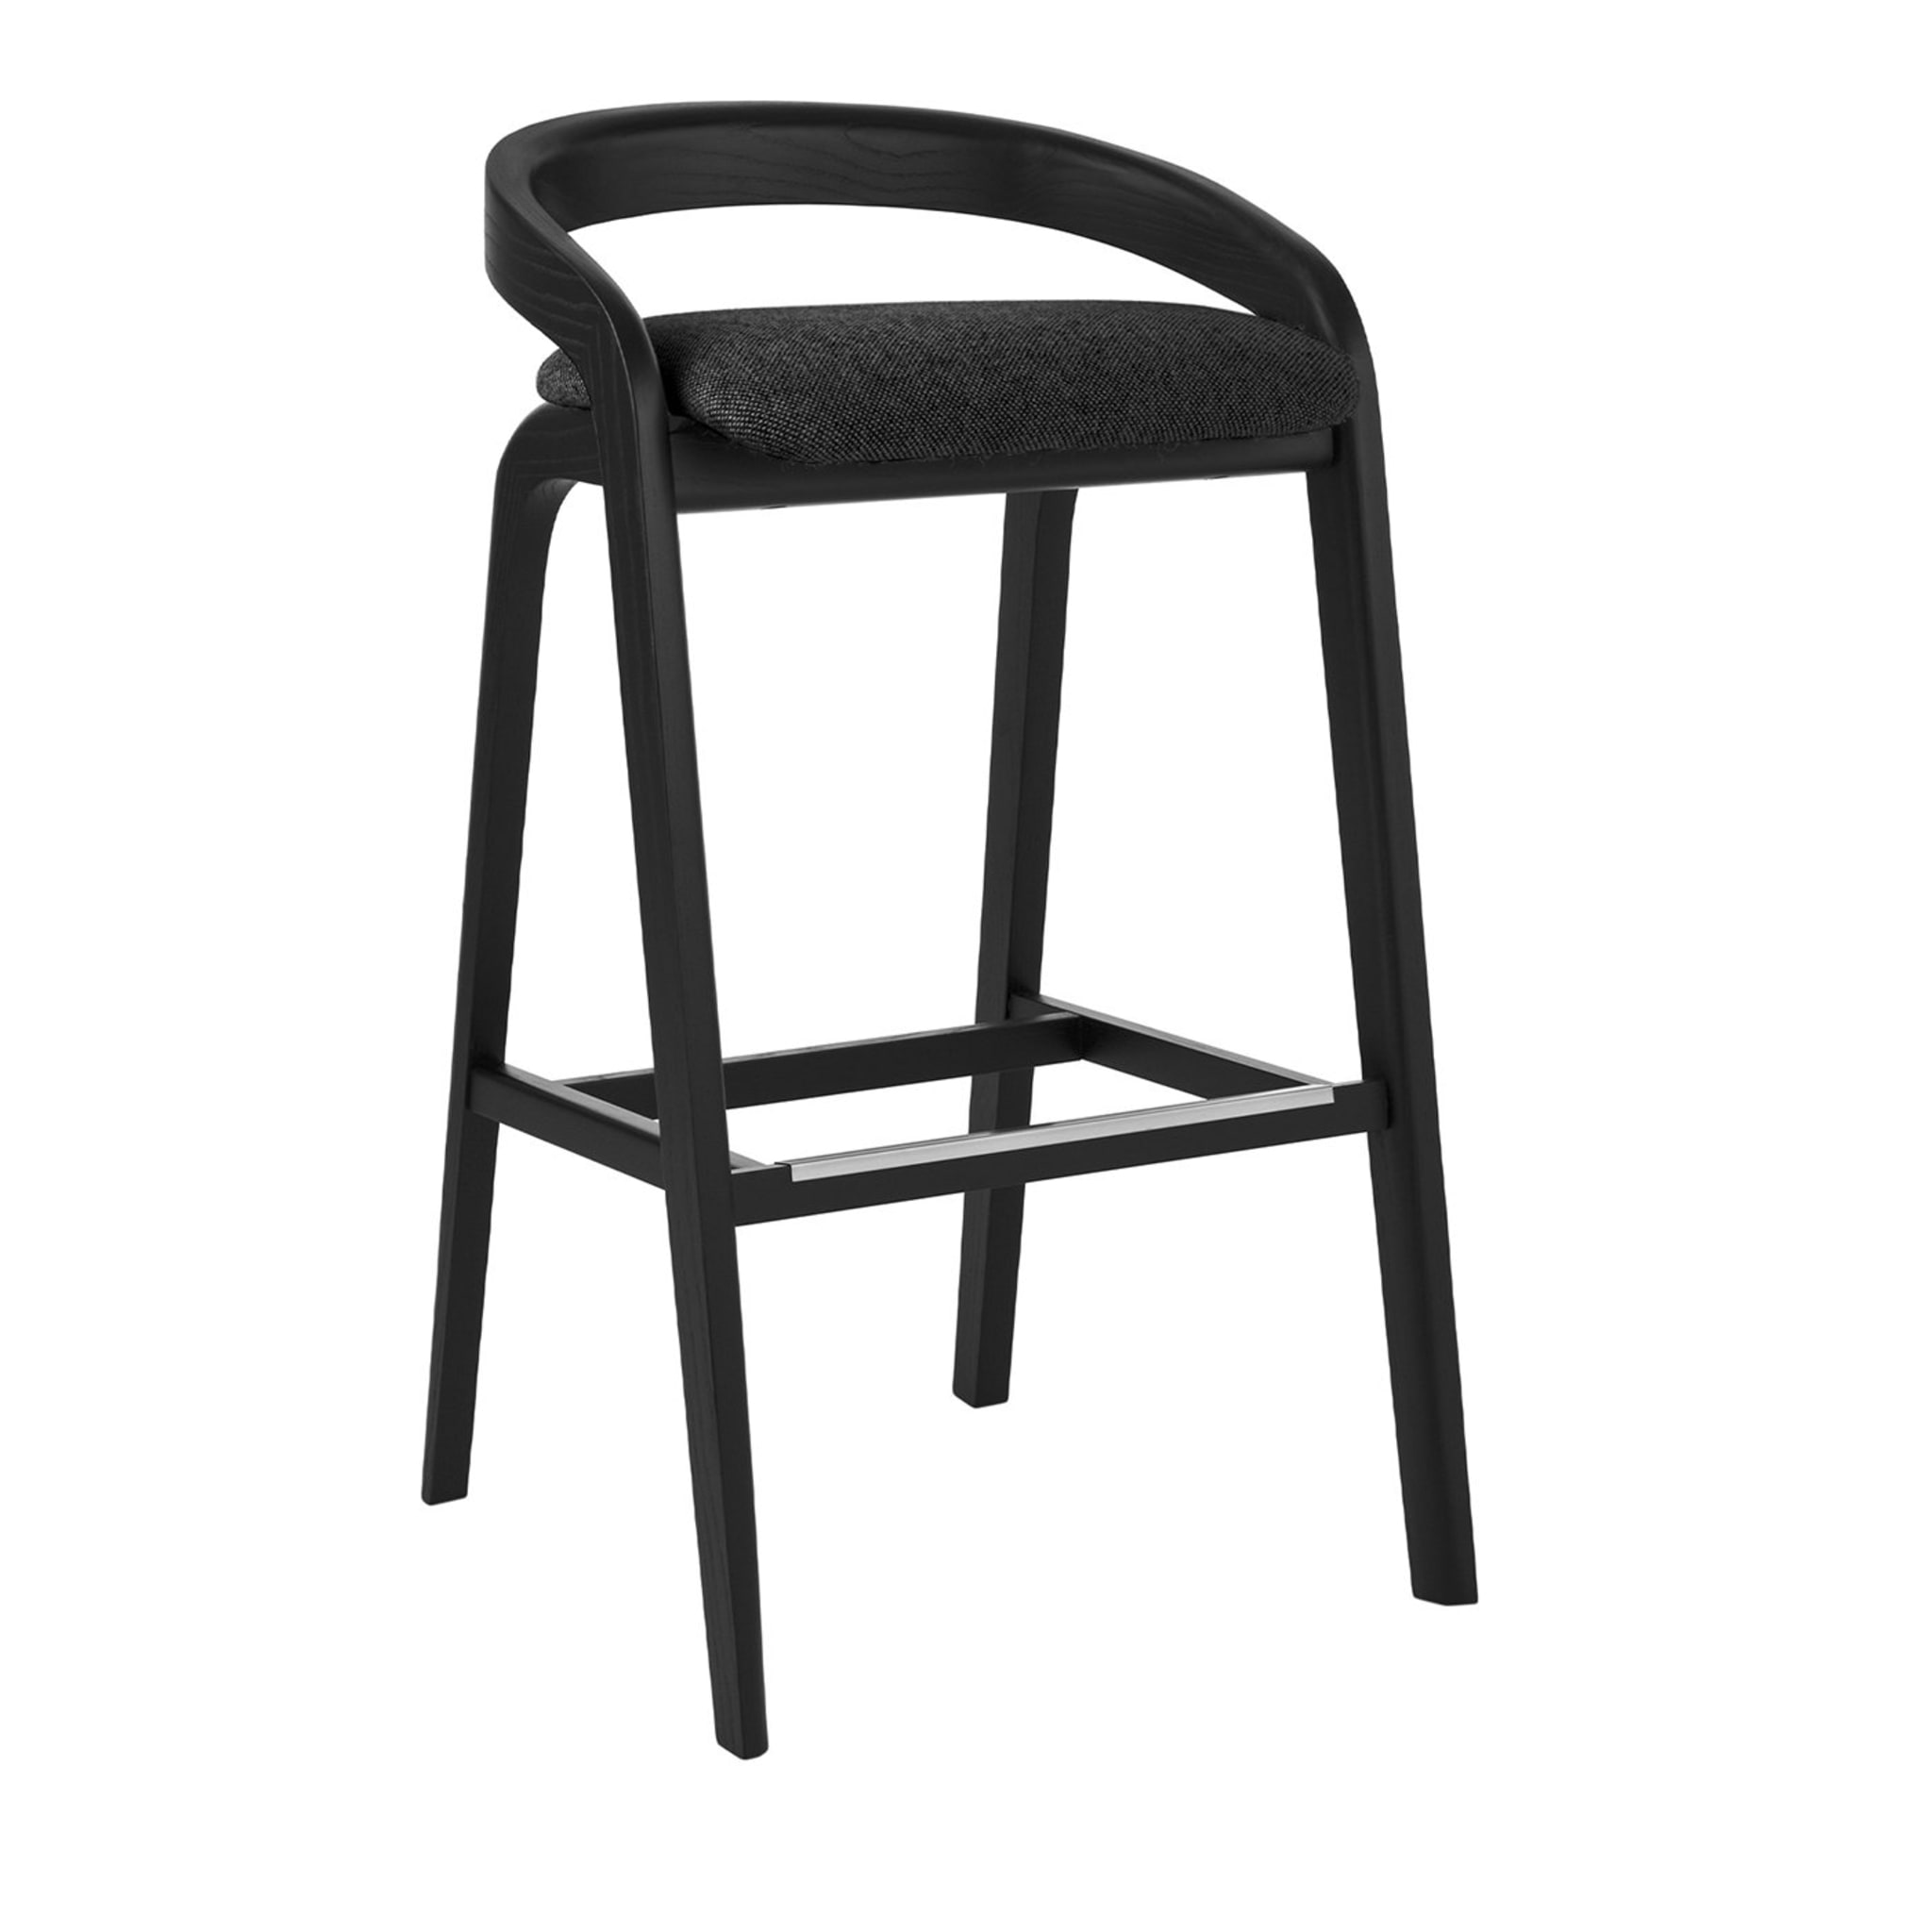 Genea Black Ash Barstool with Black Upholstered Seat - Main view